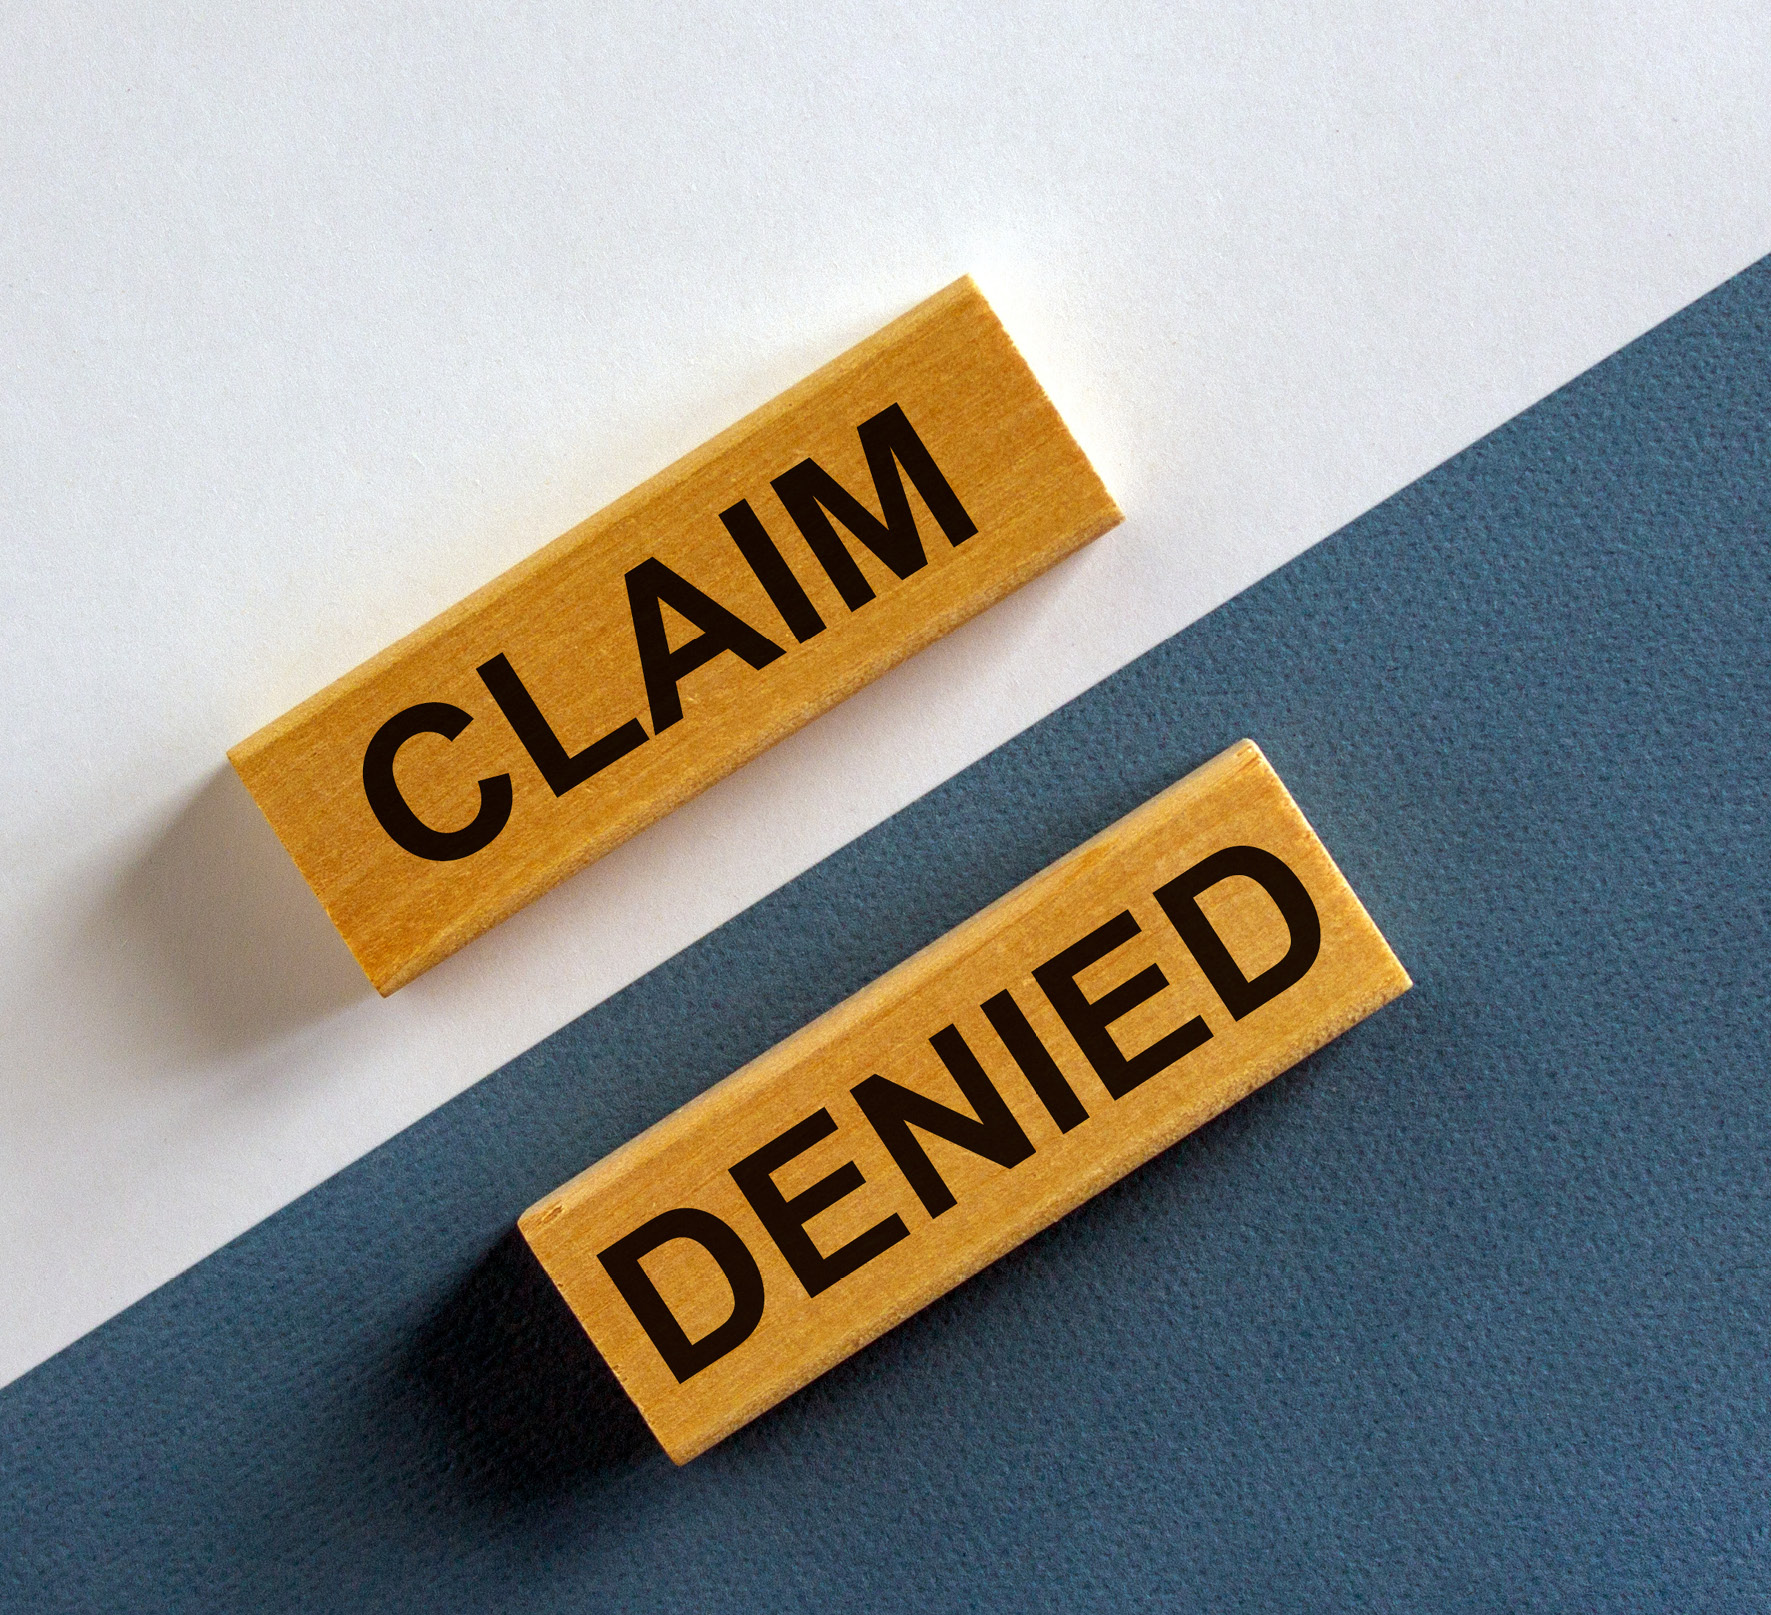 3 Things An Insurer Cannot Deny A Claim For